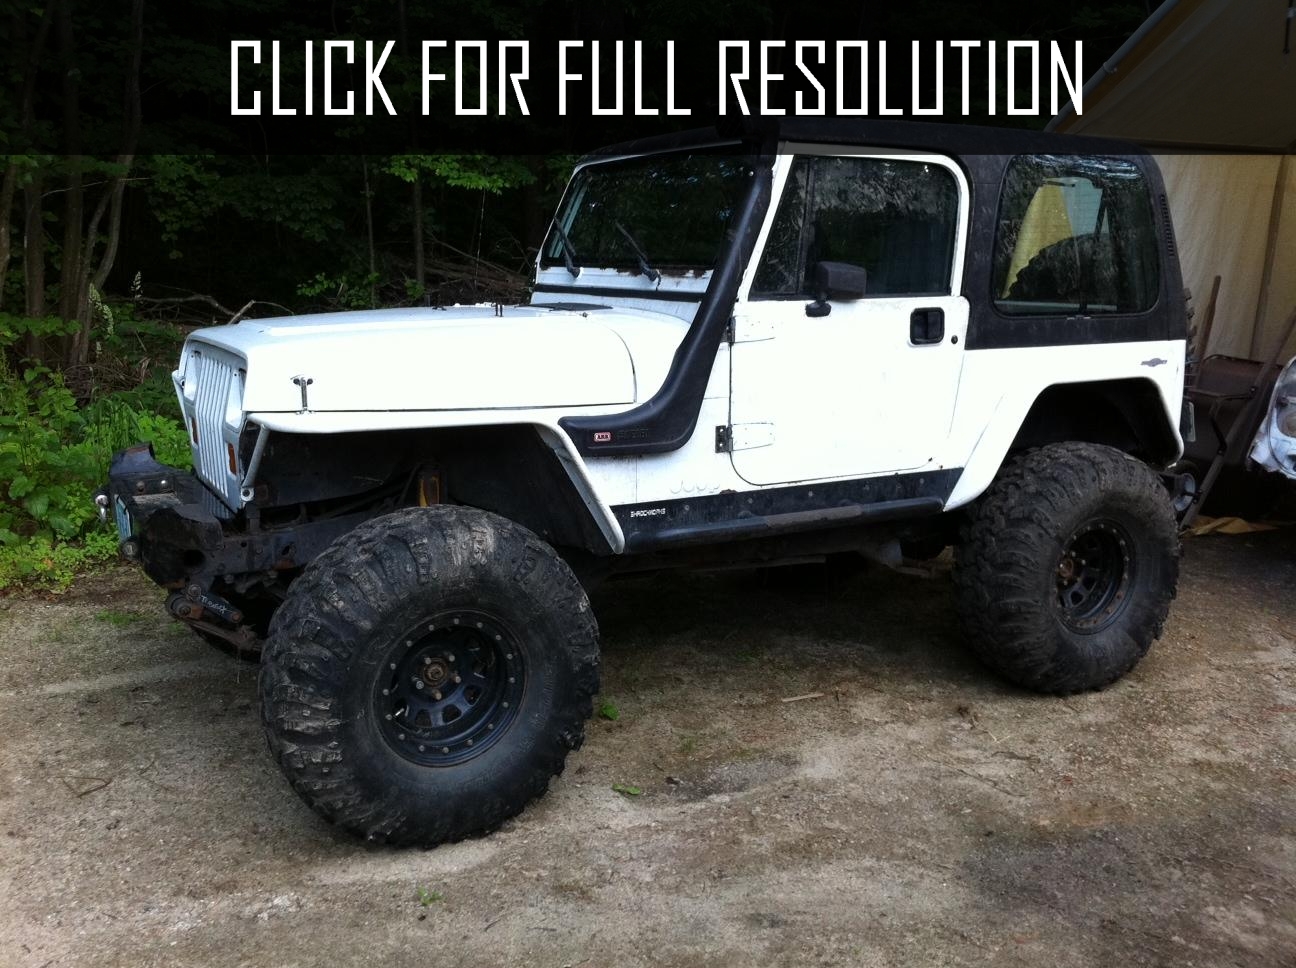 1994 Jeep Wrangler YJ best image gallery #14/23 - share and download